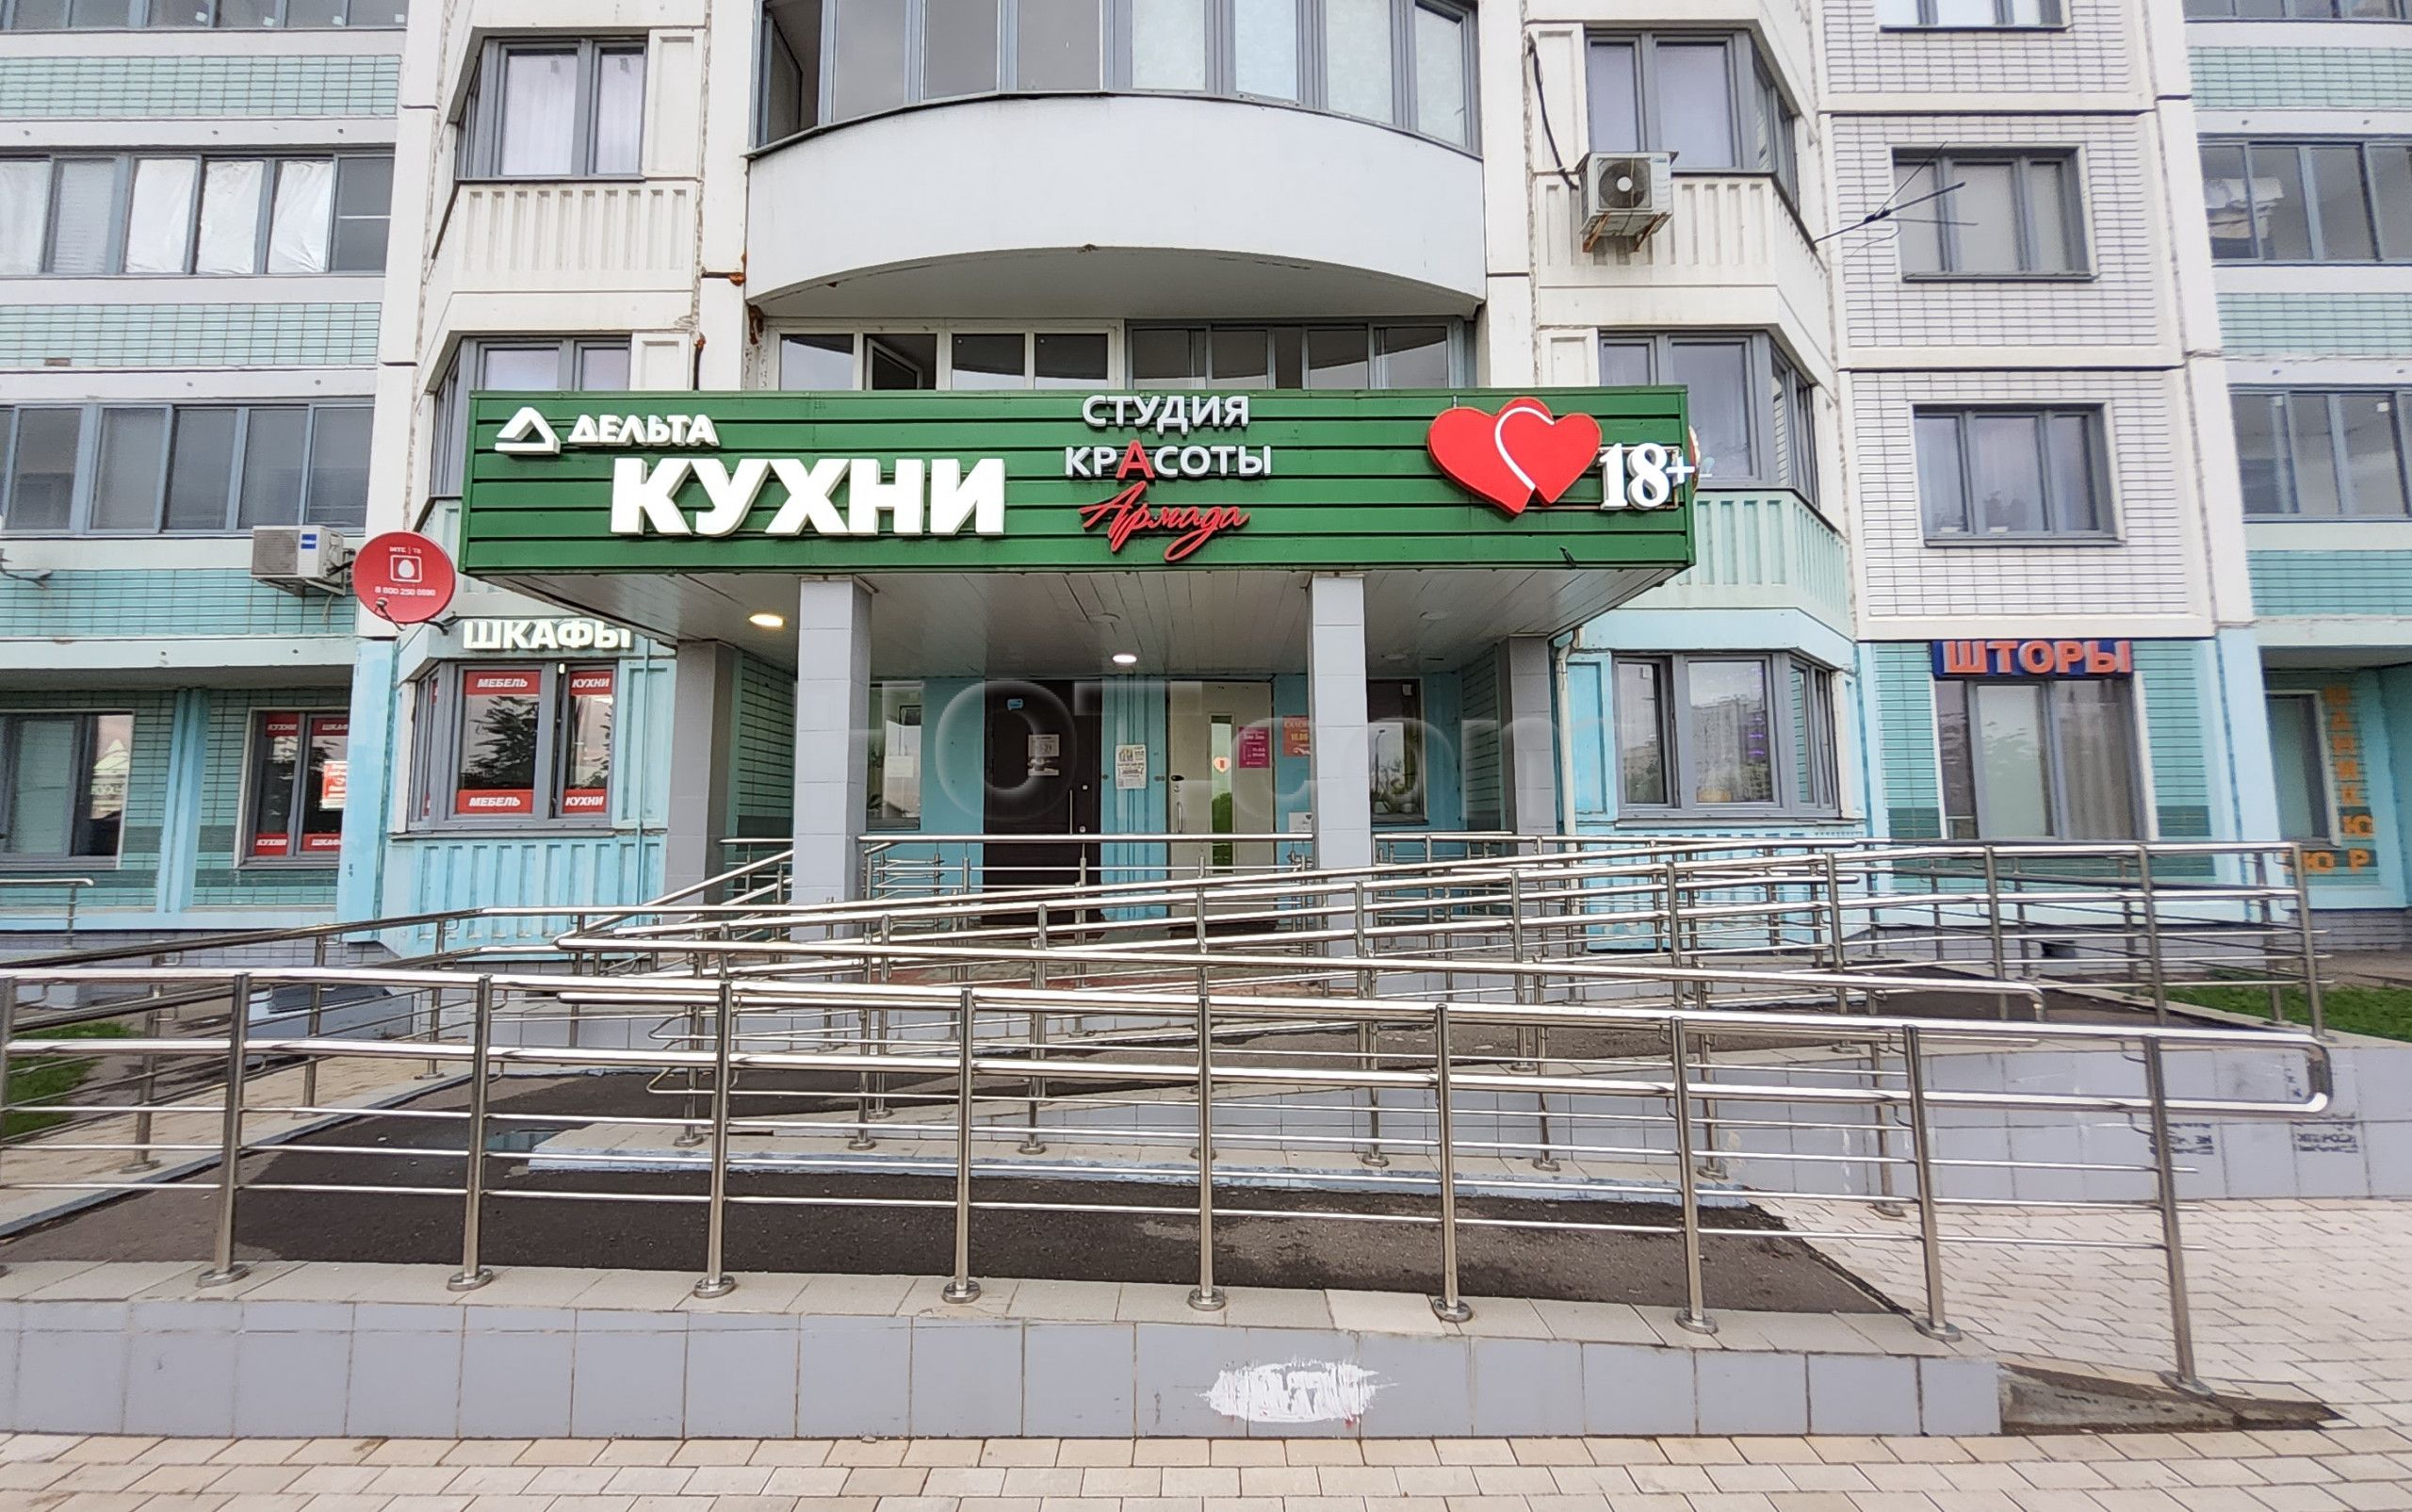 Moscow, Russia Love Line